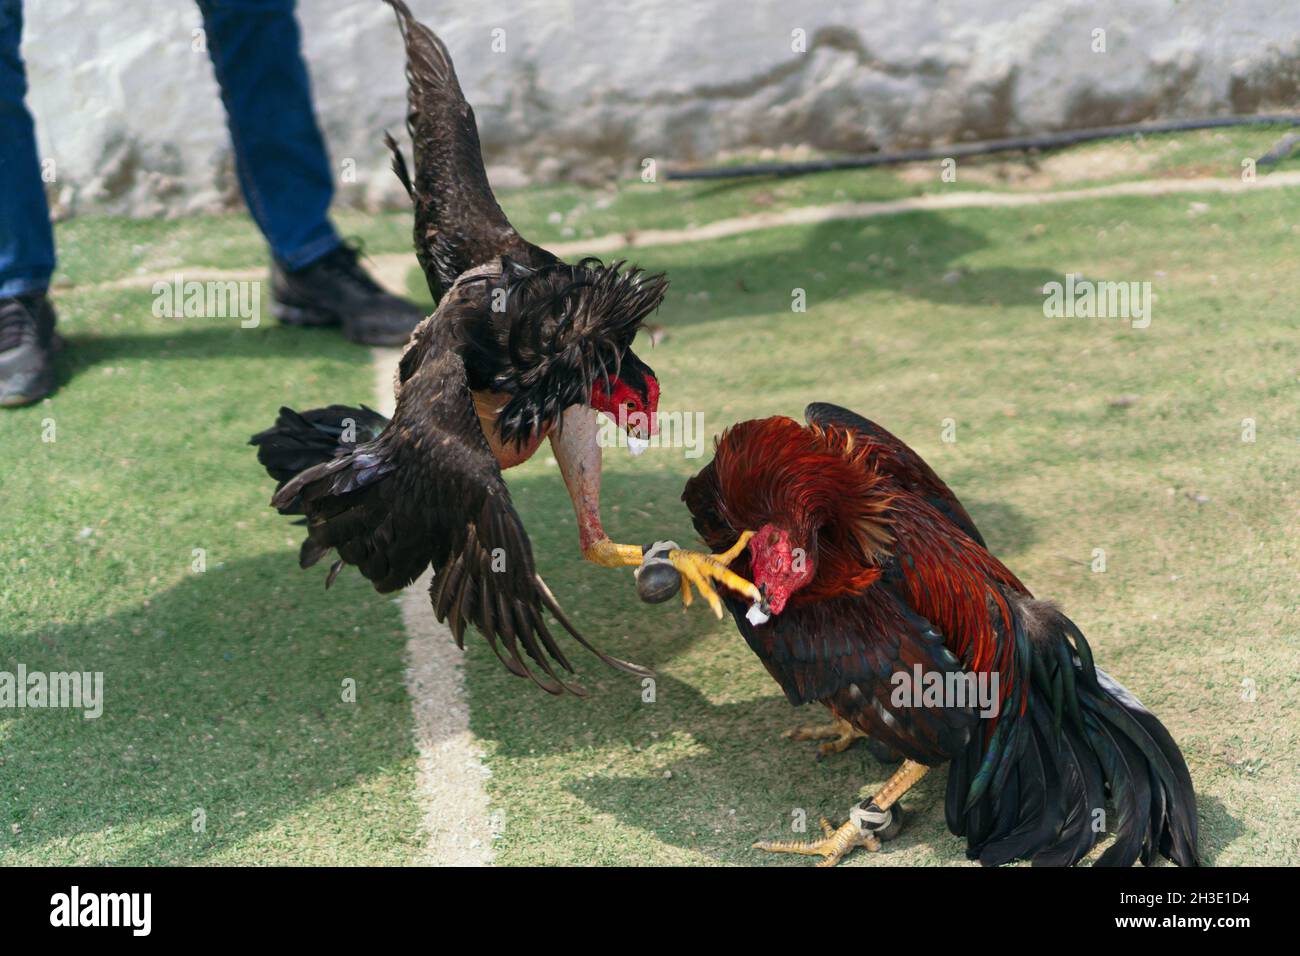 Two roosters fighting in a green grass. Two red roosters fighting. Stock Photo